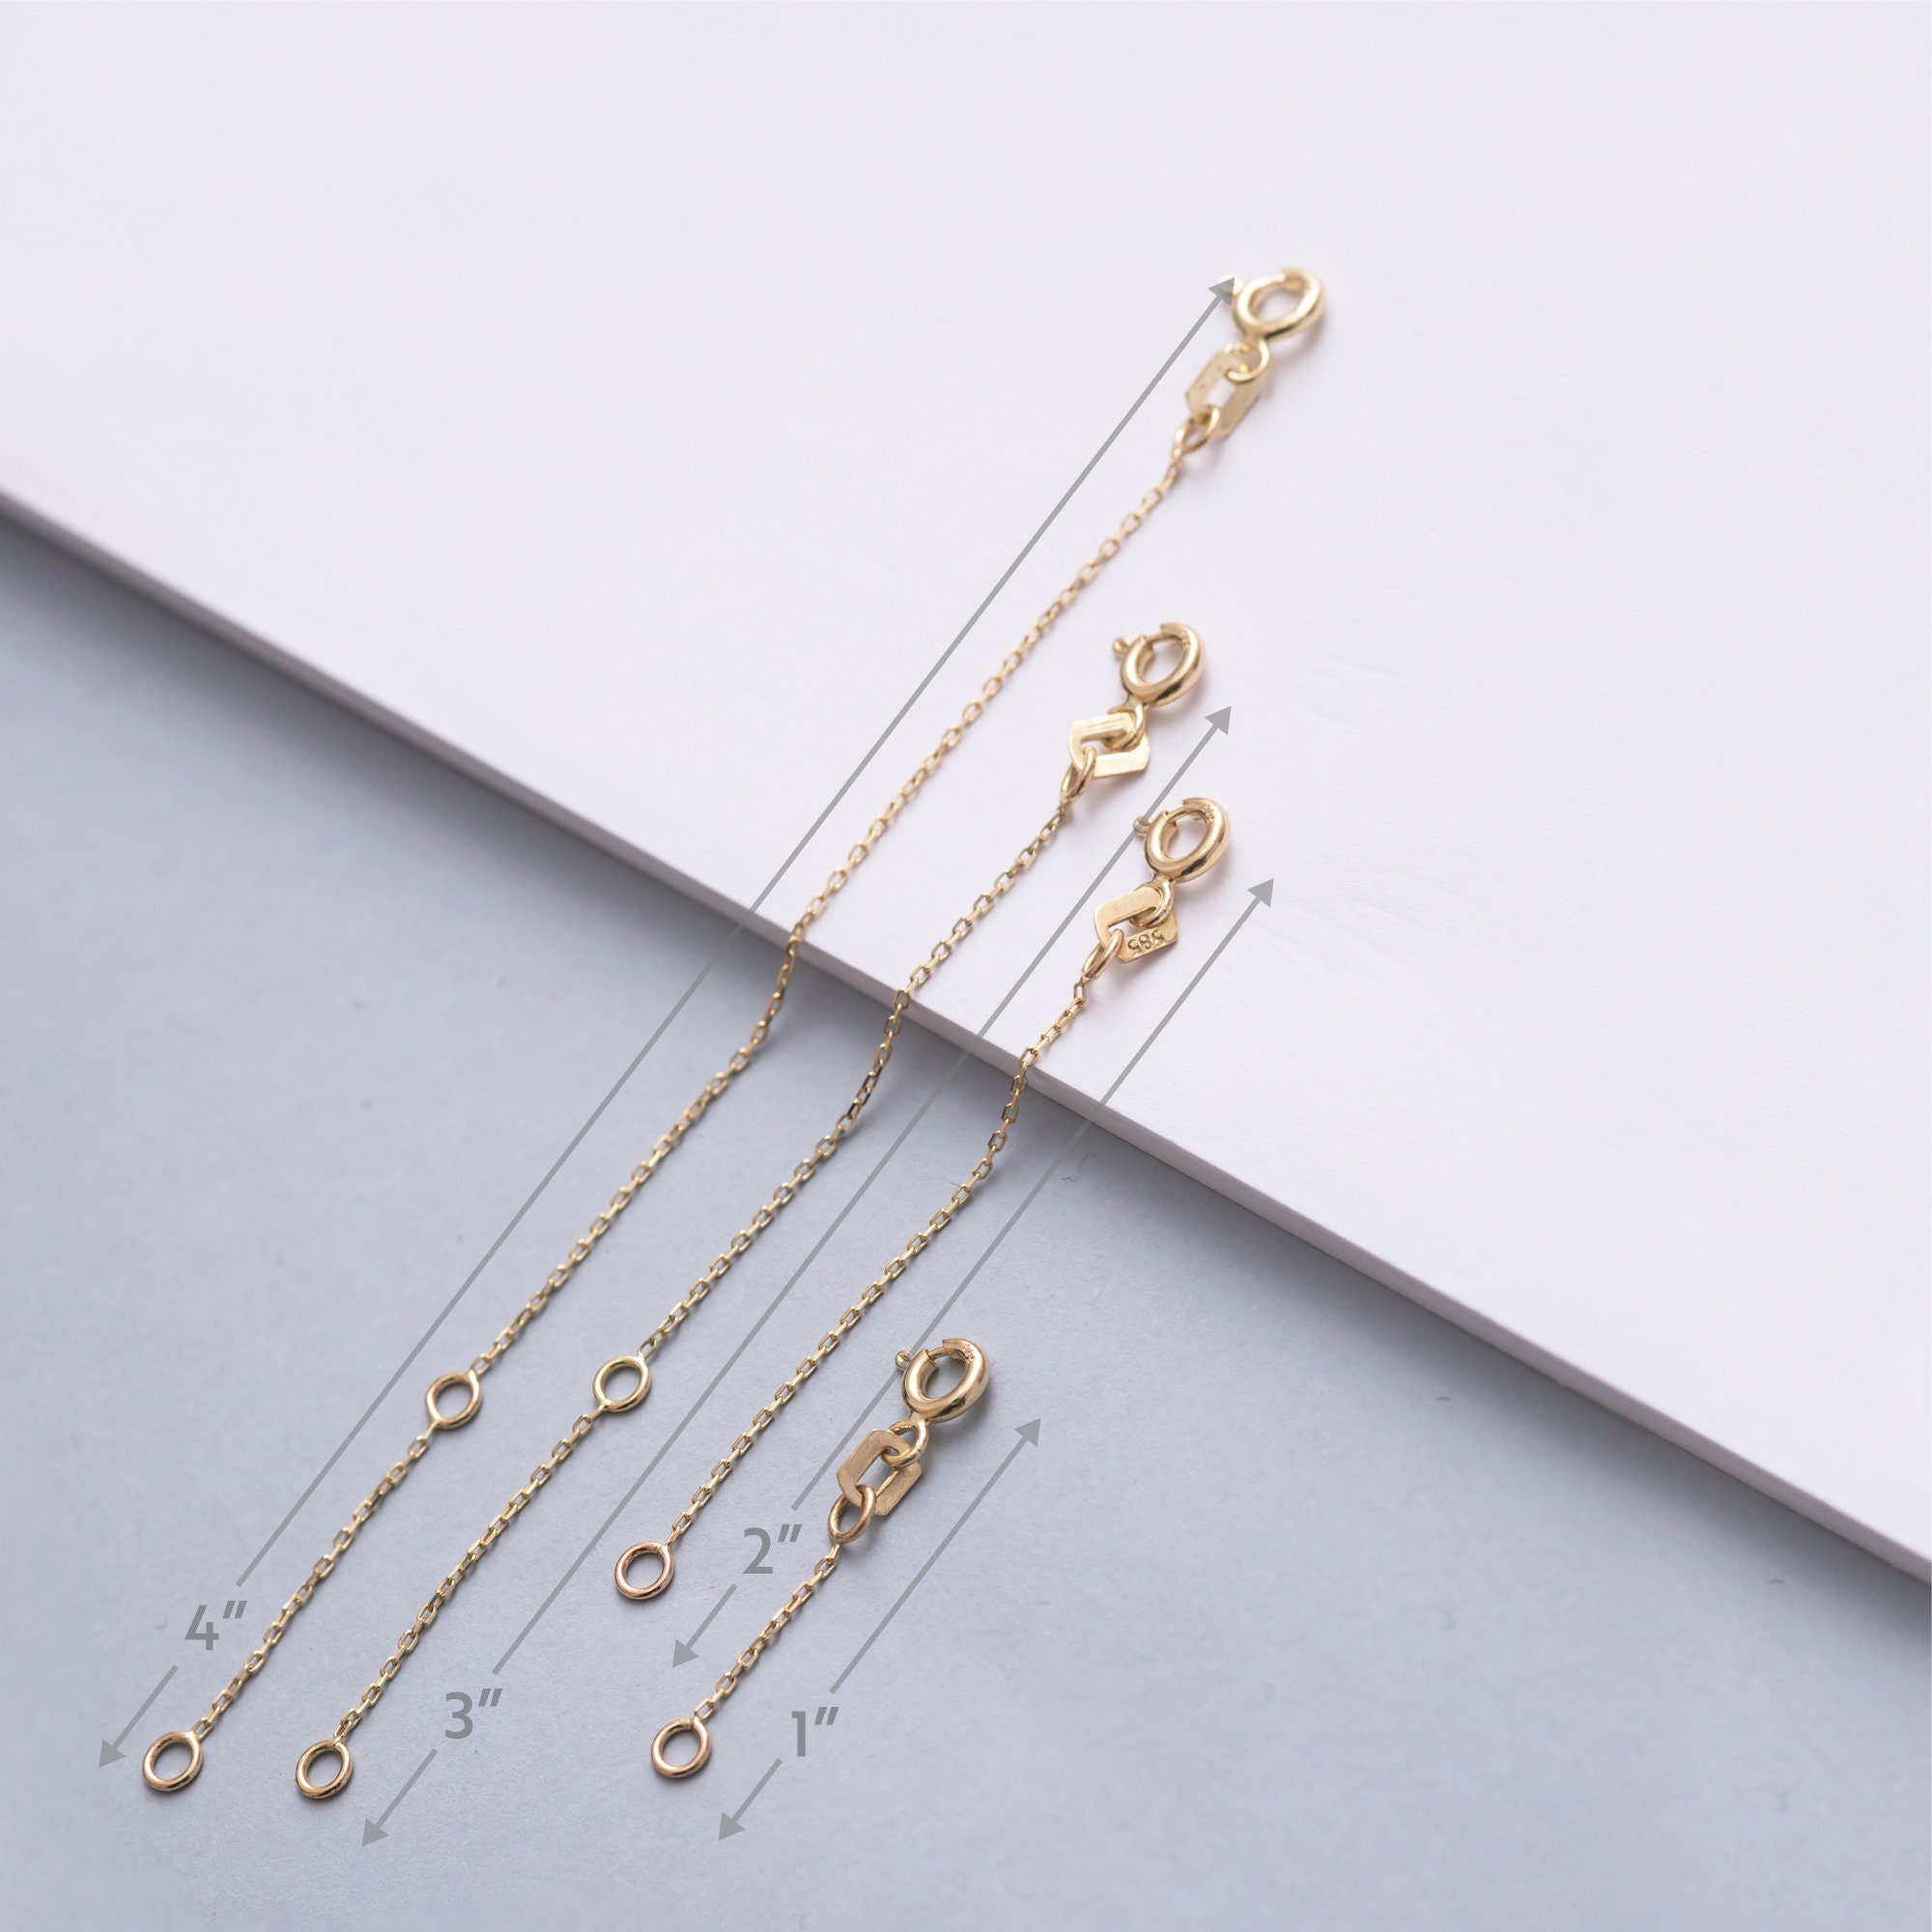 Add On A Removable Necklace Extender – Queens Metal